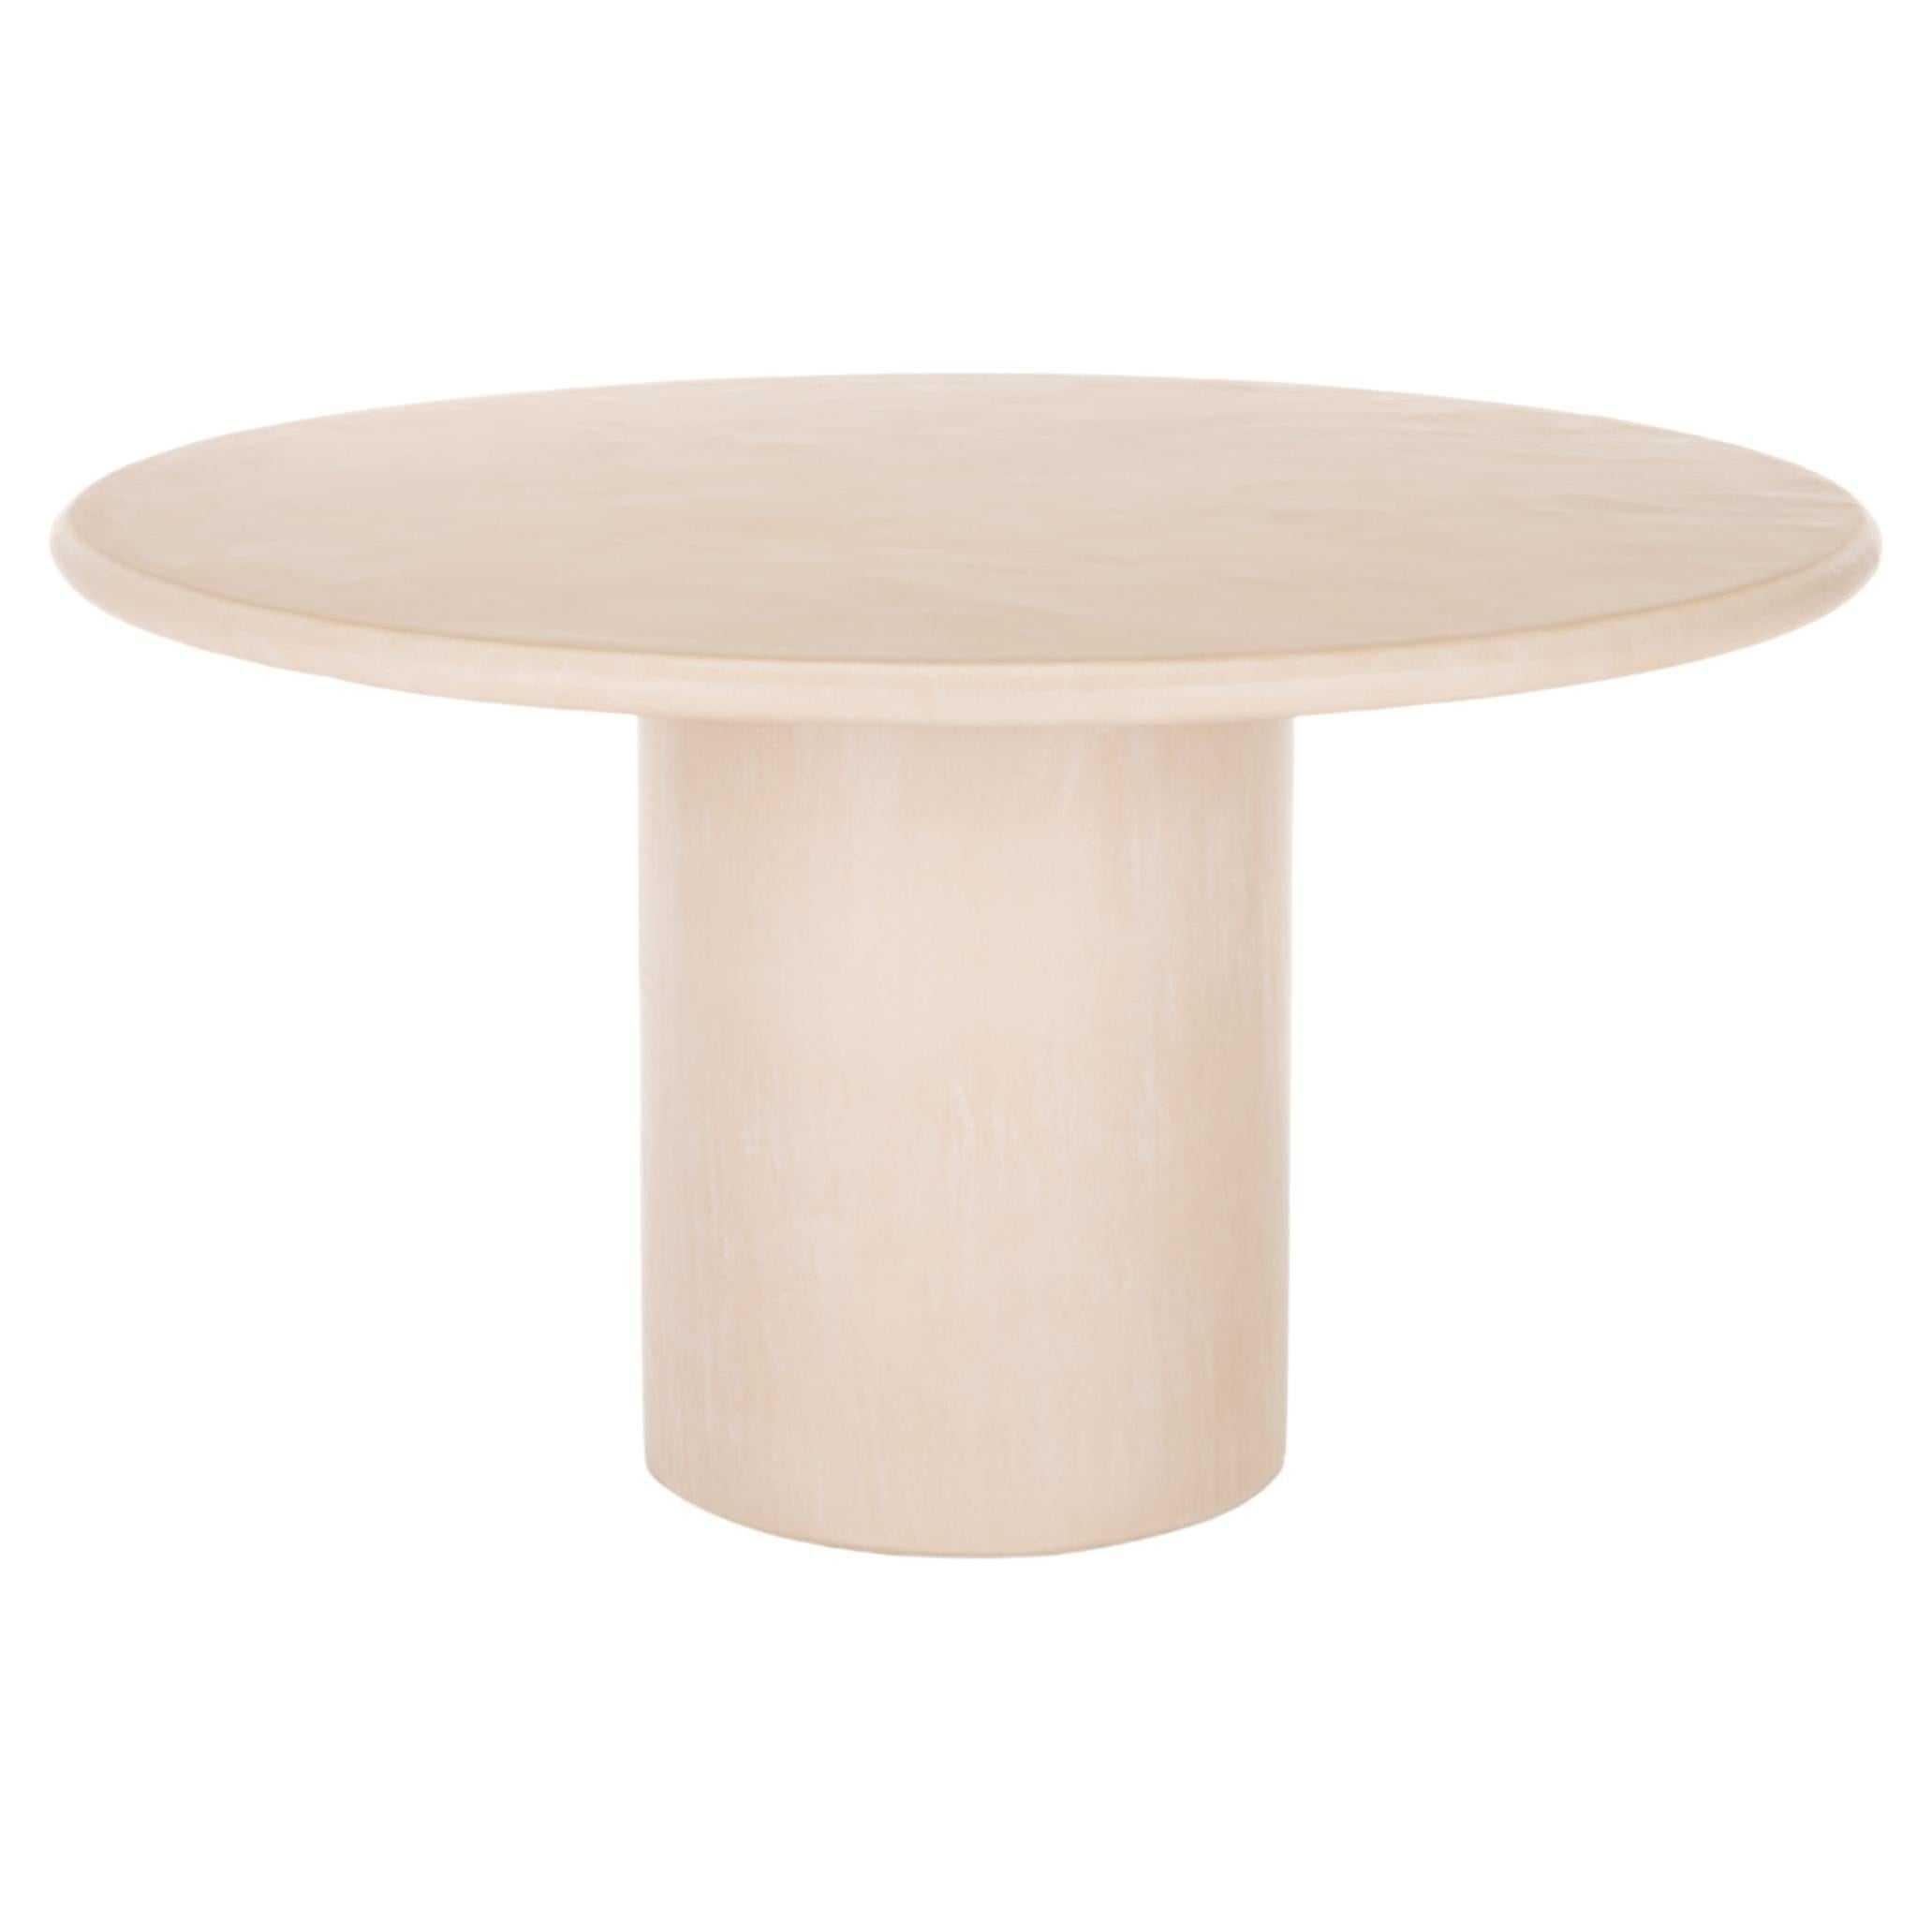 Round Natural Plaster Dining Table "Column" 180 by Isabelle Beaumont